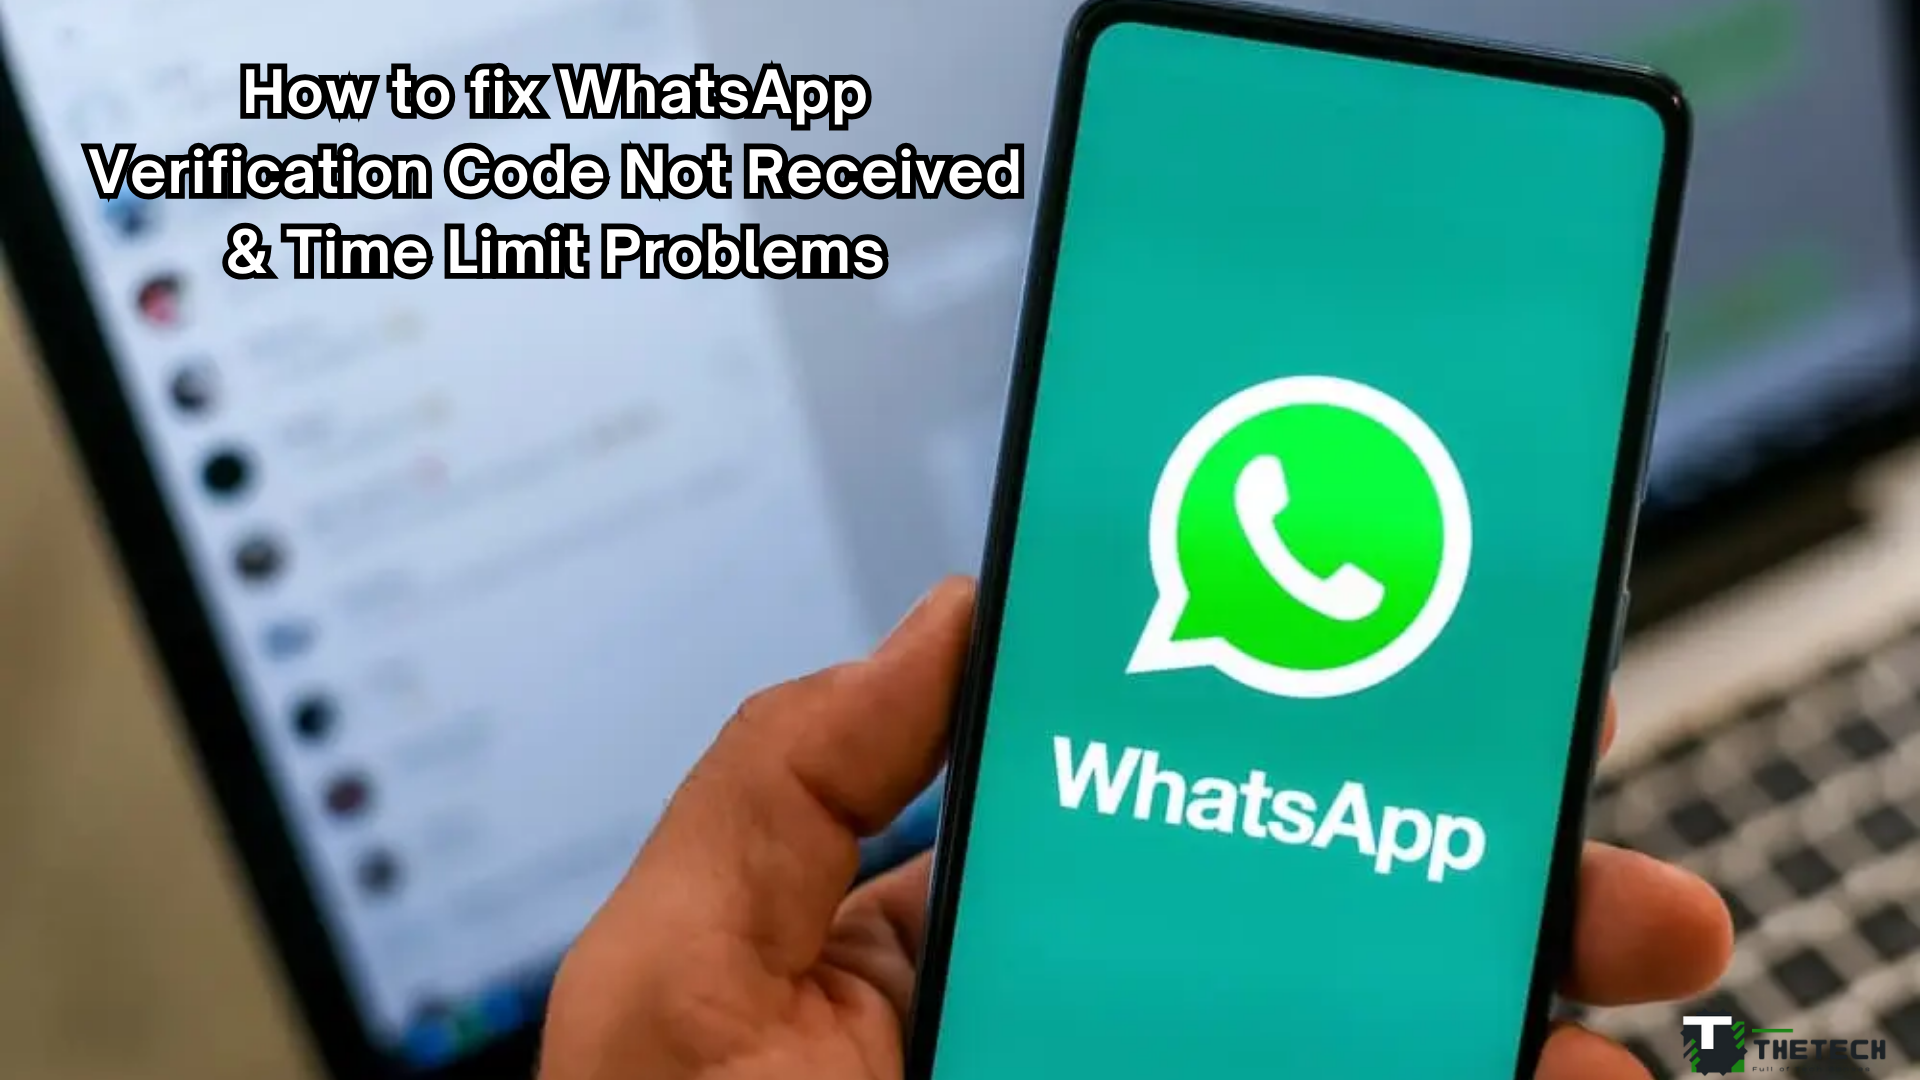 How to fix WhatsApp Verification Code Not Received & Time Limit Problems